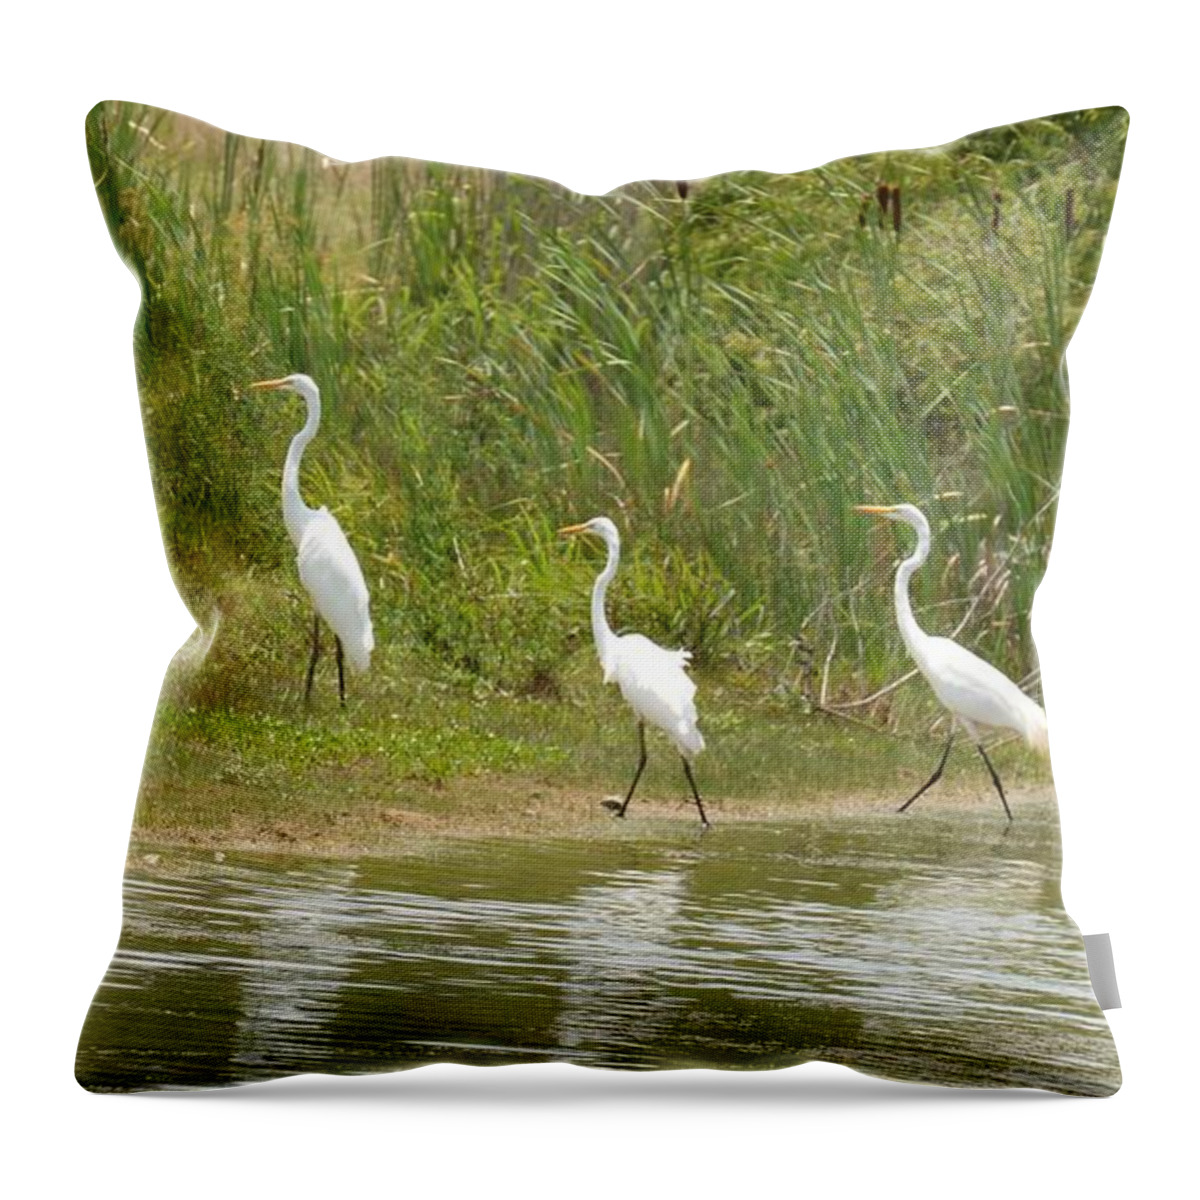 Egret Family 2 Throw Pillow featuring the photograph Egret Family 2 by Maria Urso